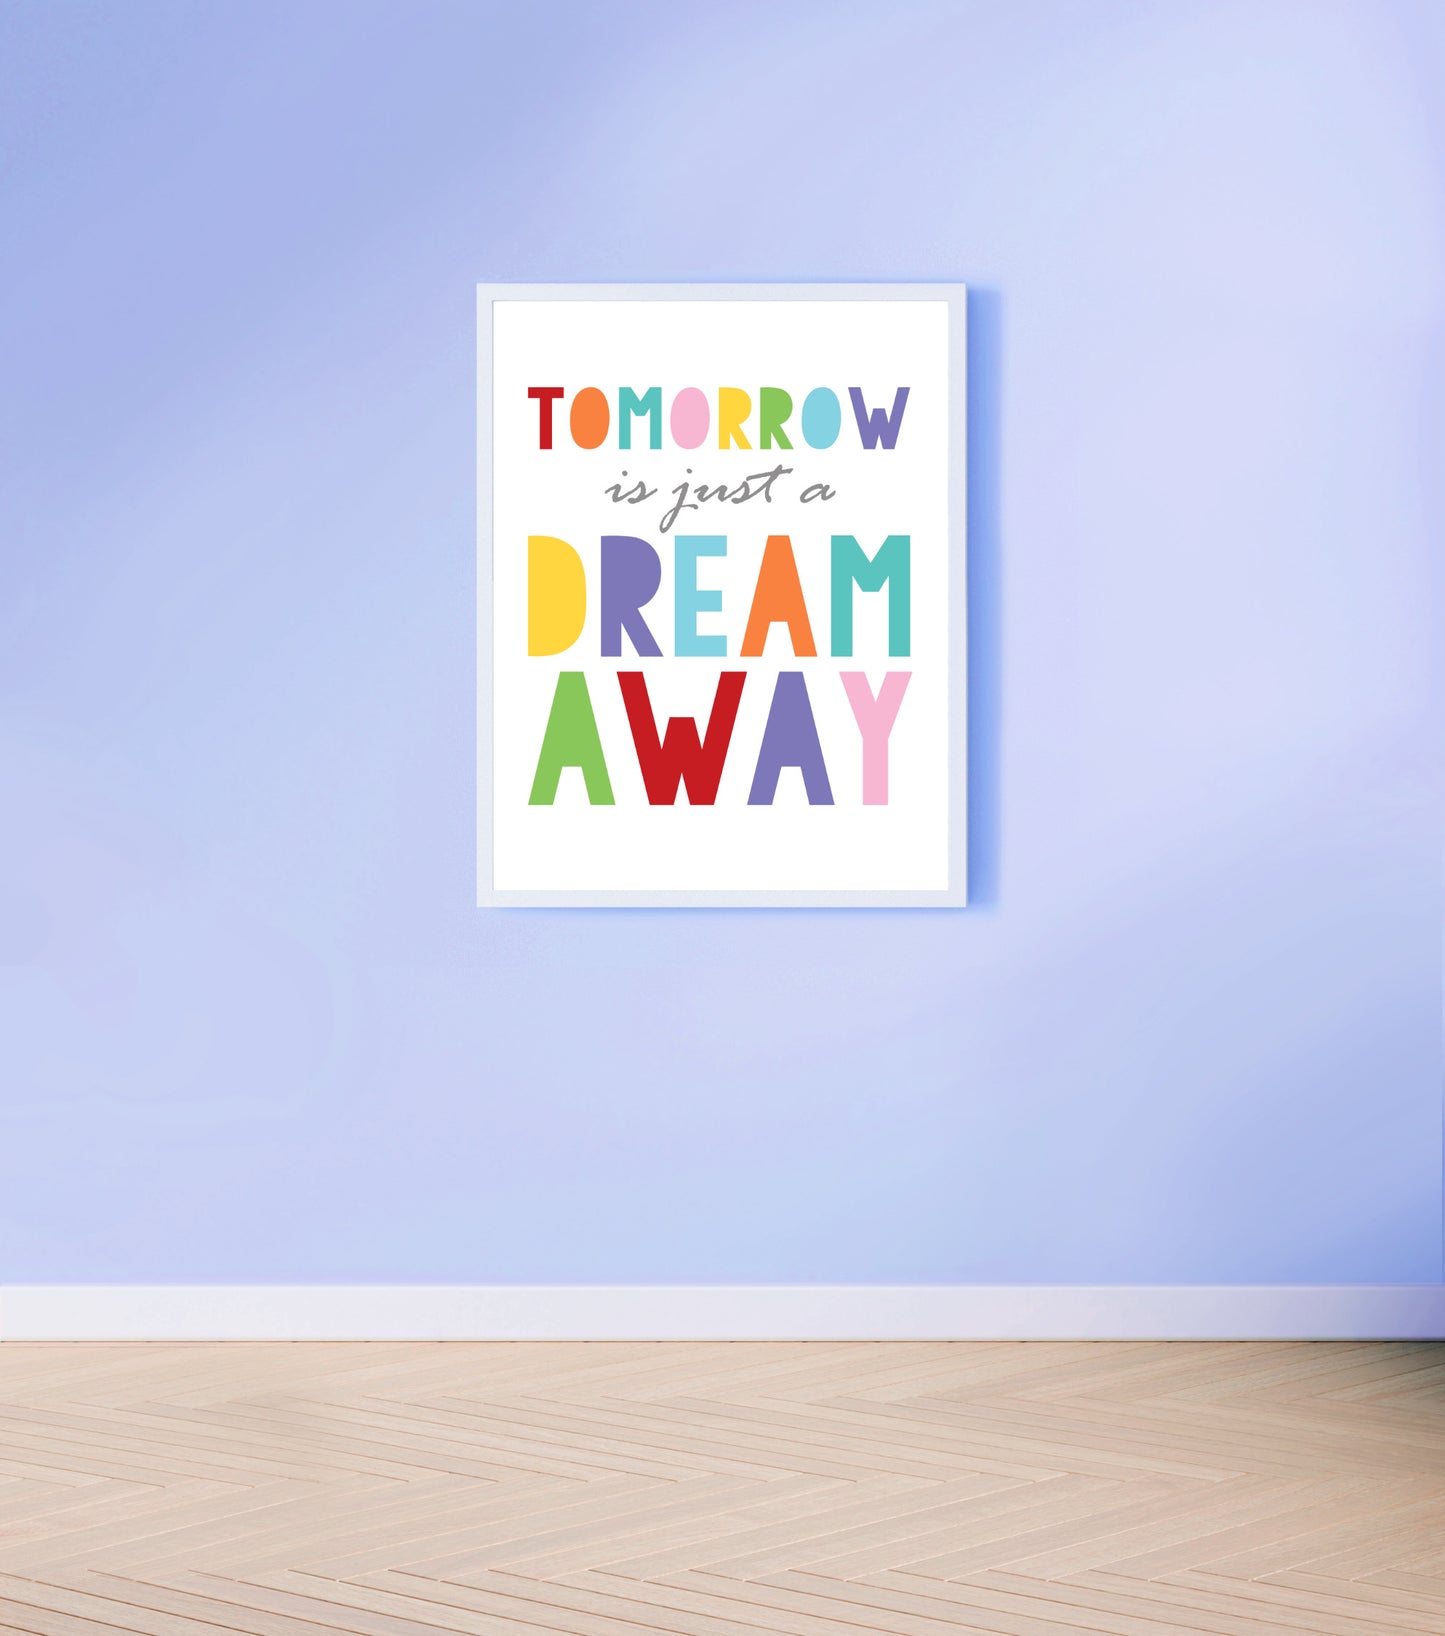 Tomorrow is just a dream away print